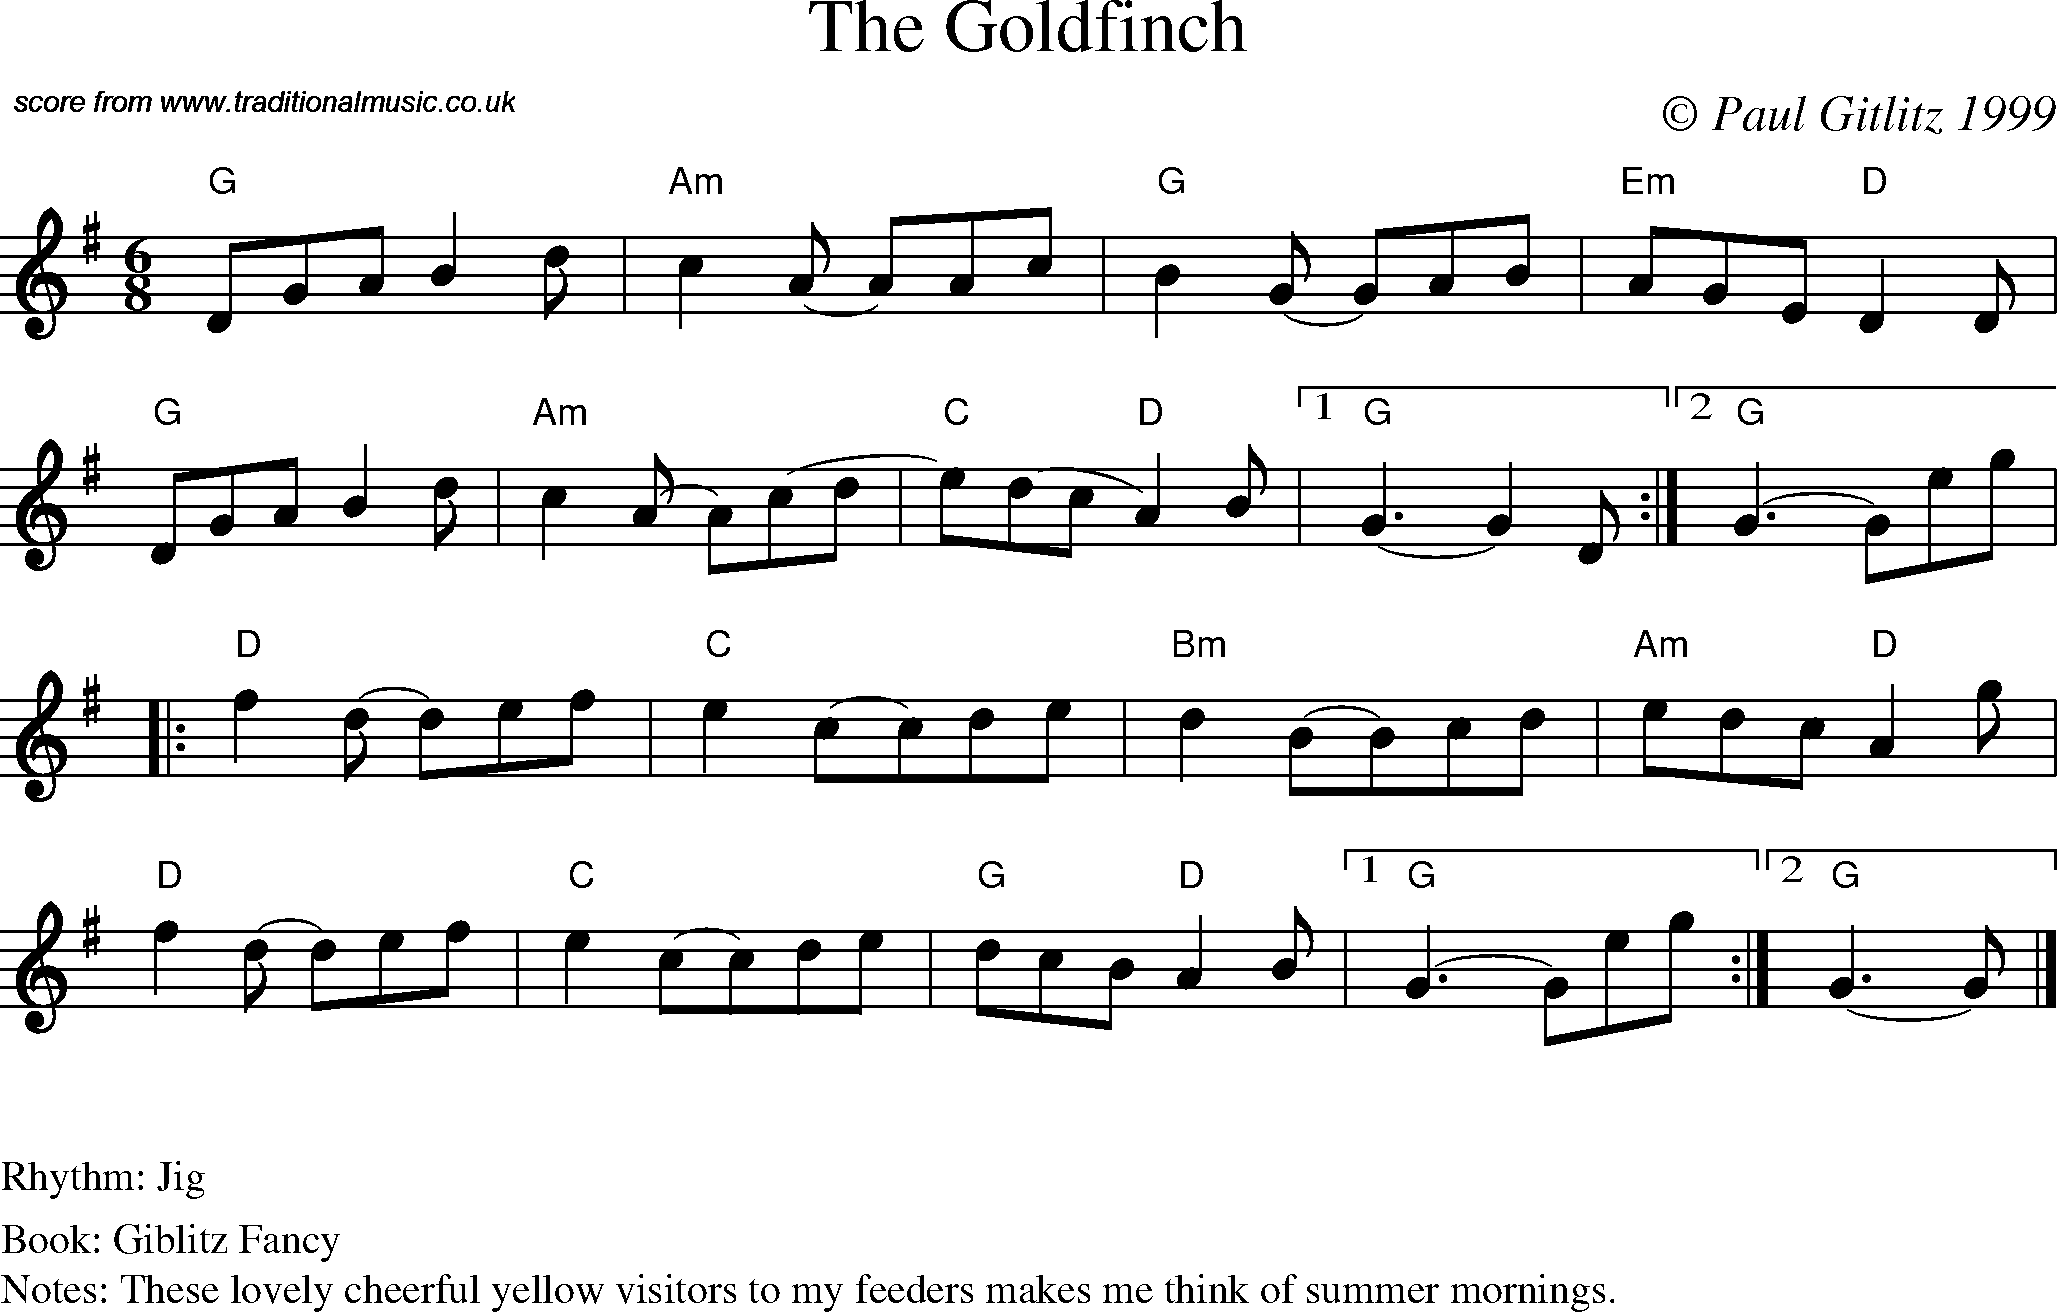 Sheet Music Score for Jig - The Goldfinch